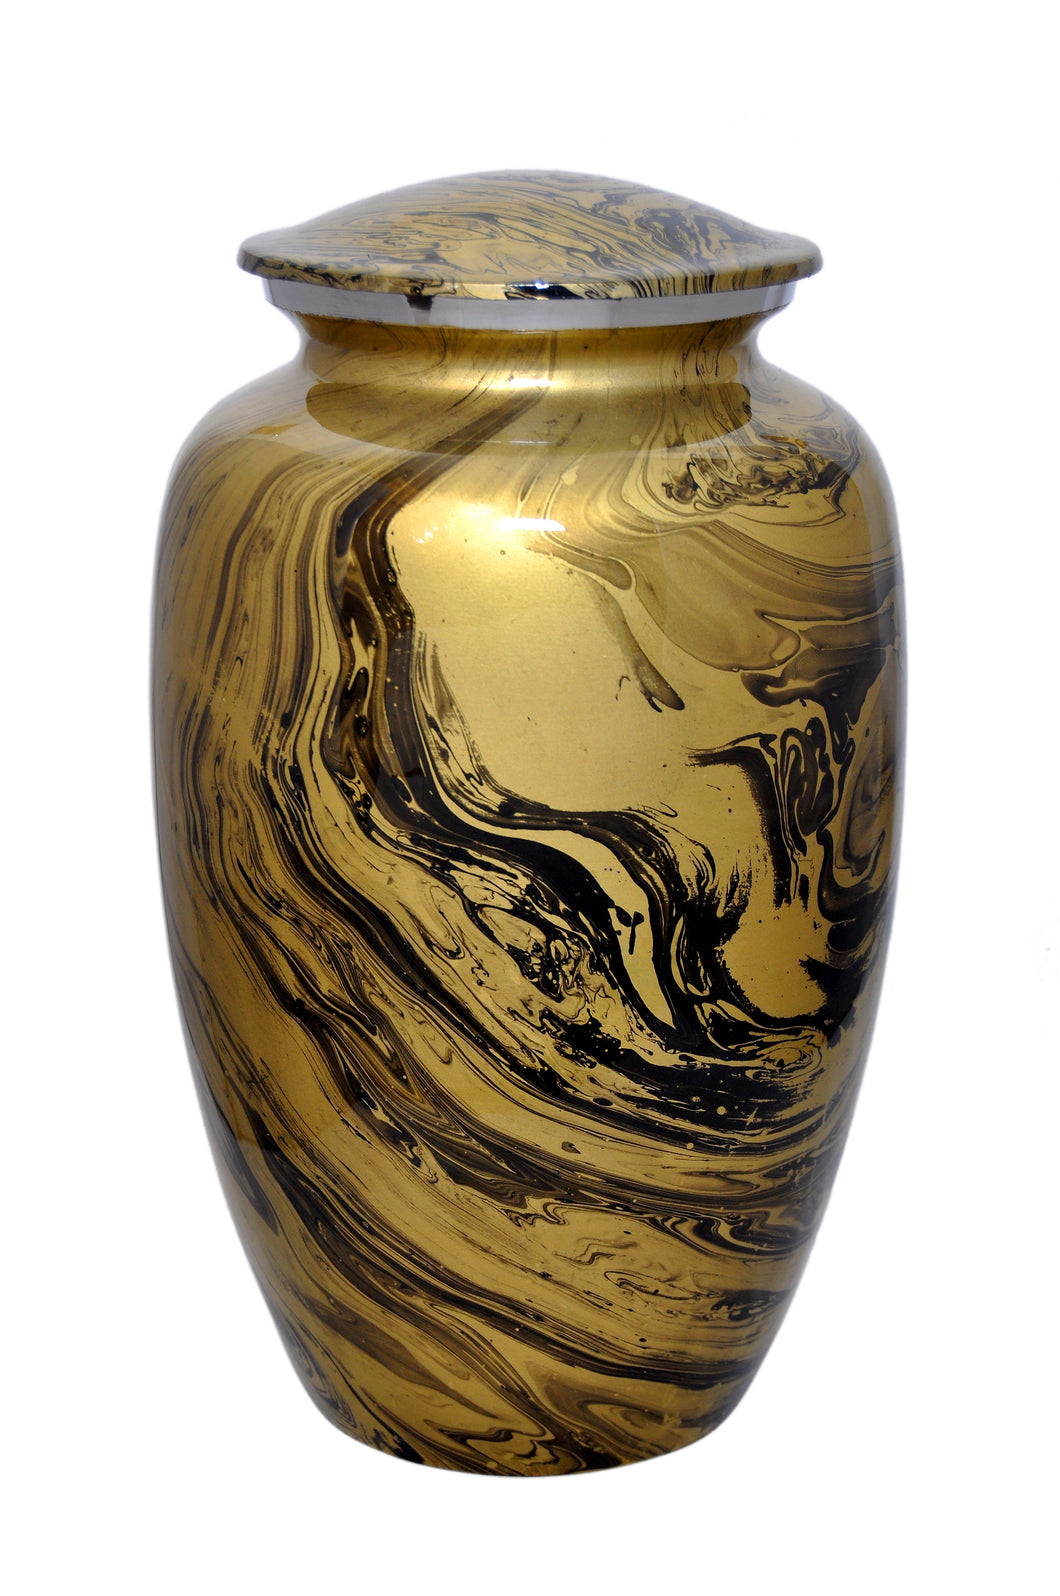 Large Gold & Black Marble Effect Adult or Pet Urn | Love to Treasure